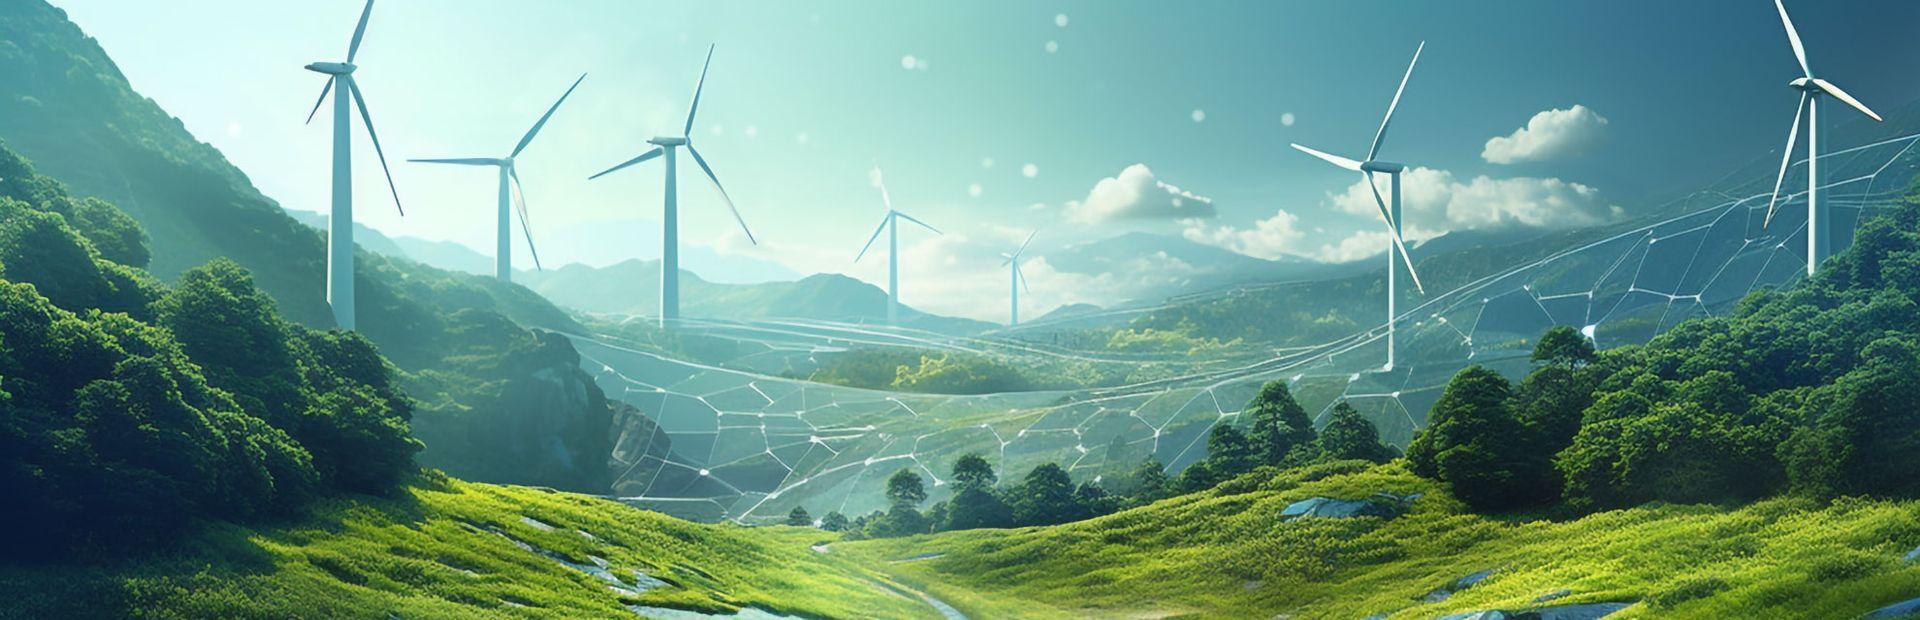 Digital sustainability concept image of a landscape in the future with renewable energy resources embedded sympathetically within it